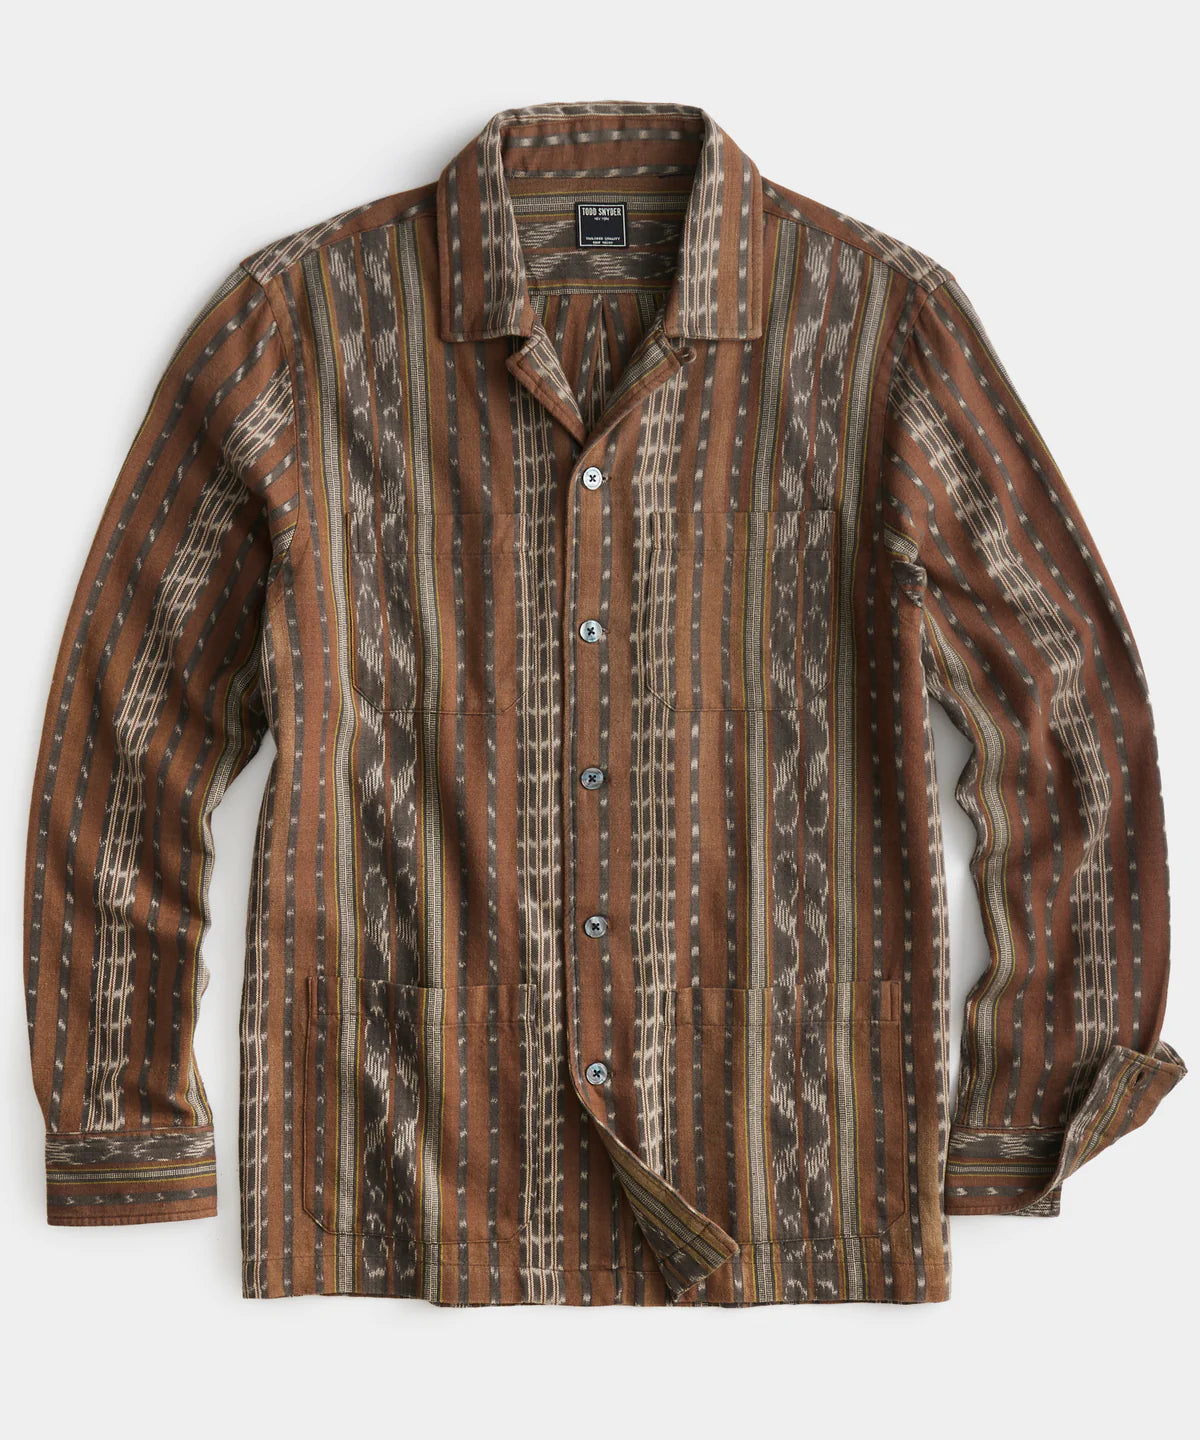 Todd Snyder - TODD SNYDER JACQUARD LONG SLEEVE GUAYABERA IN RUST - Rent With Thred